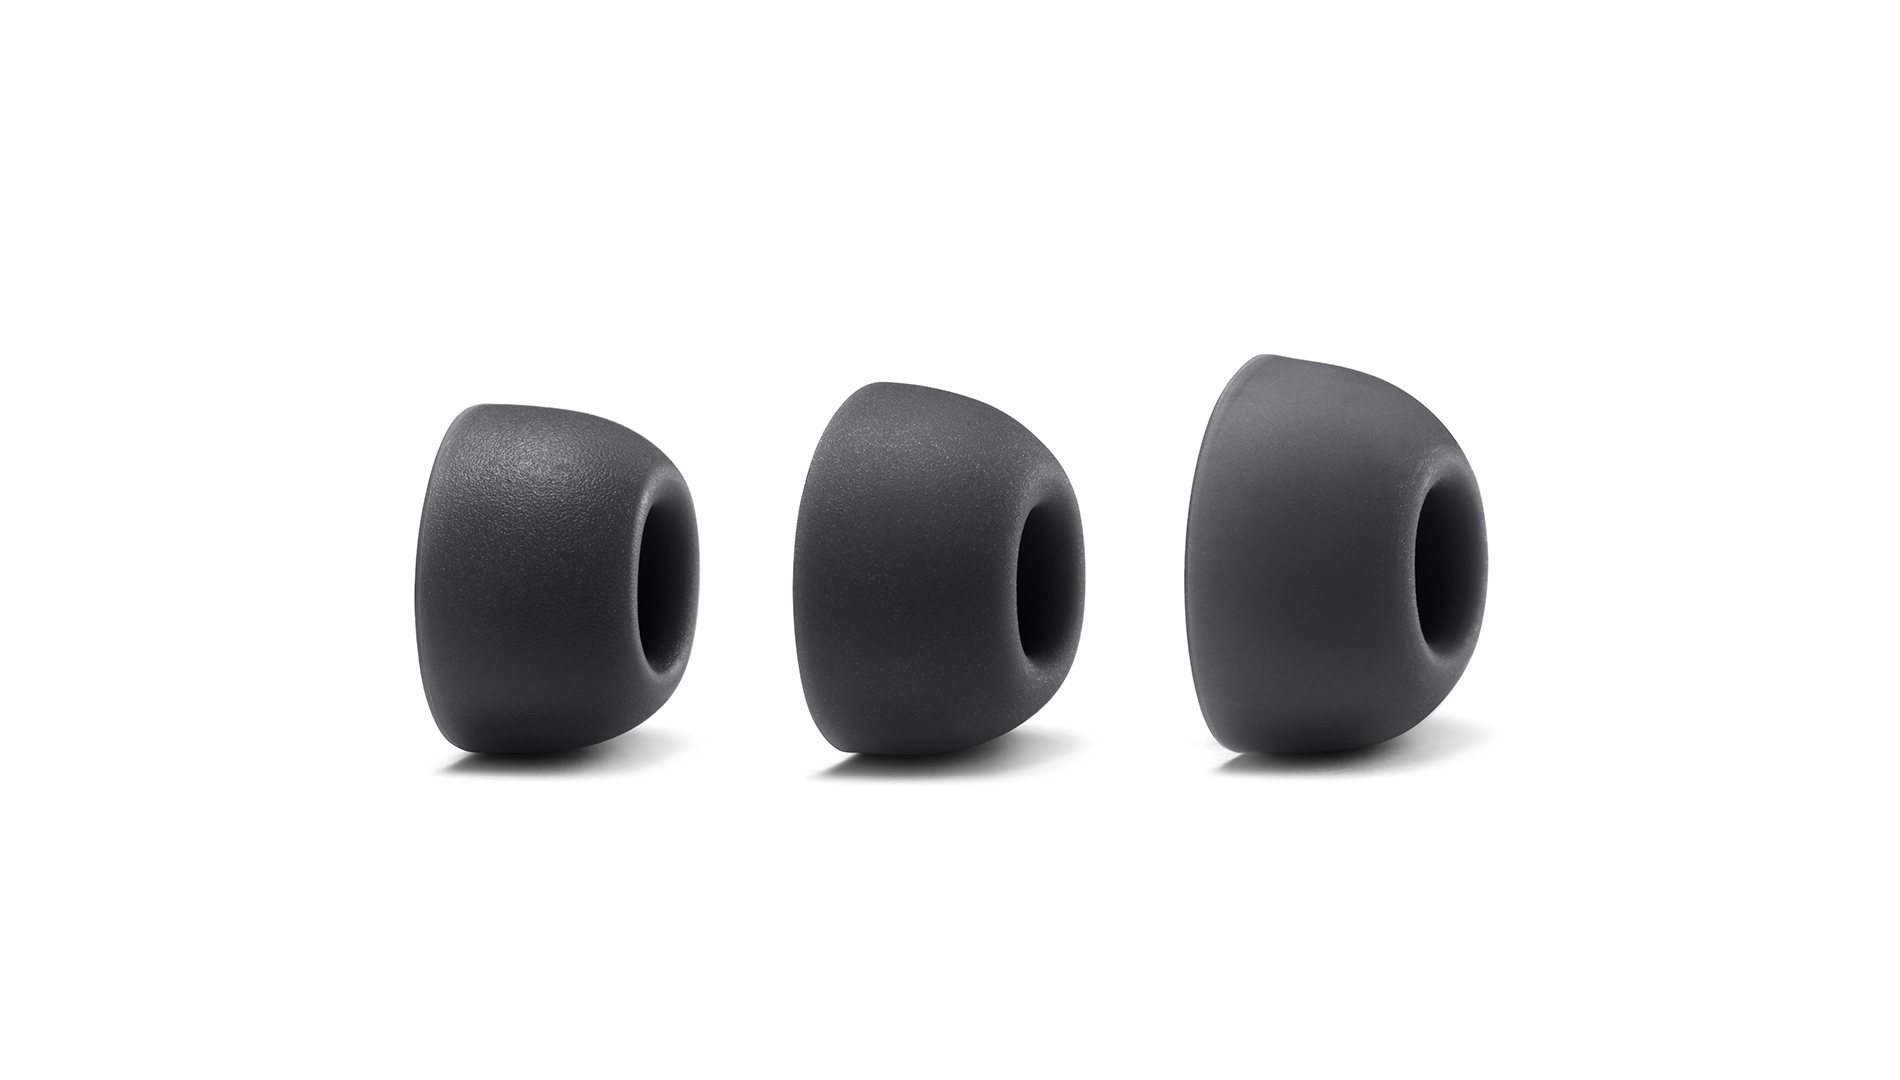 Moto buds 135 True wireless earbuds come with 3 sizes ear-caps - product image